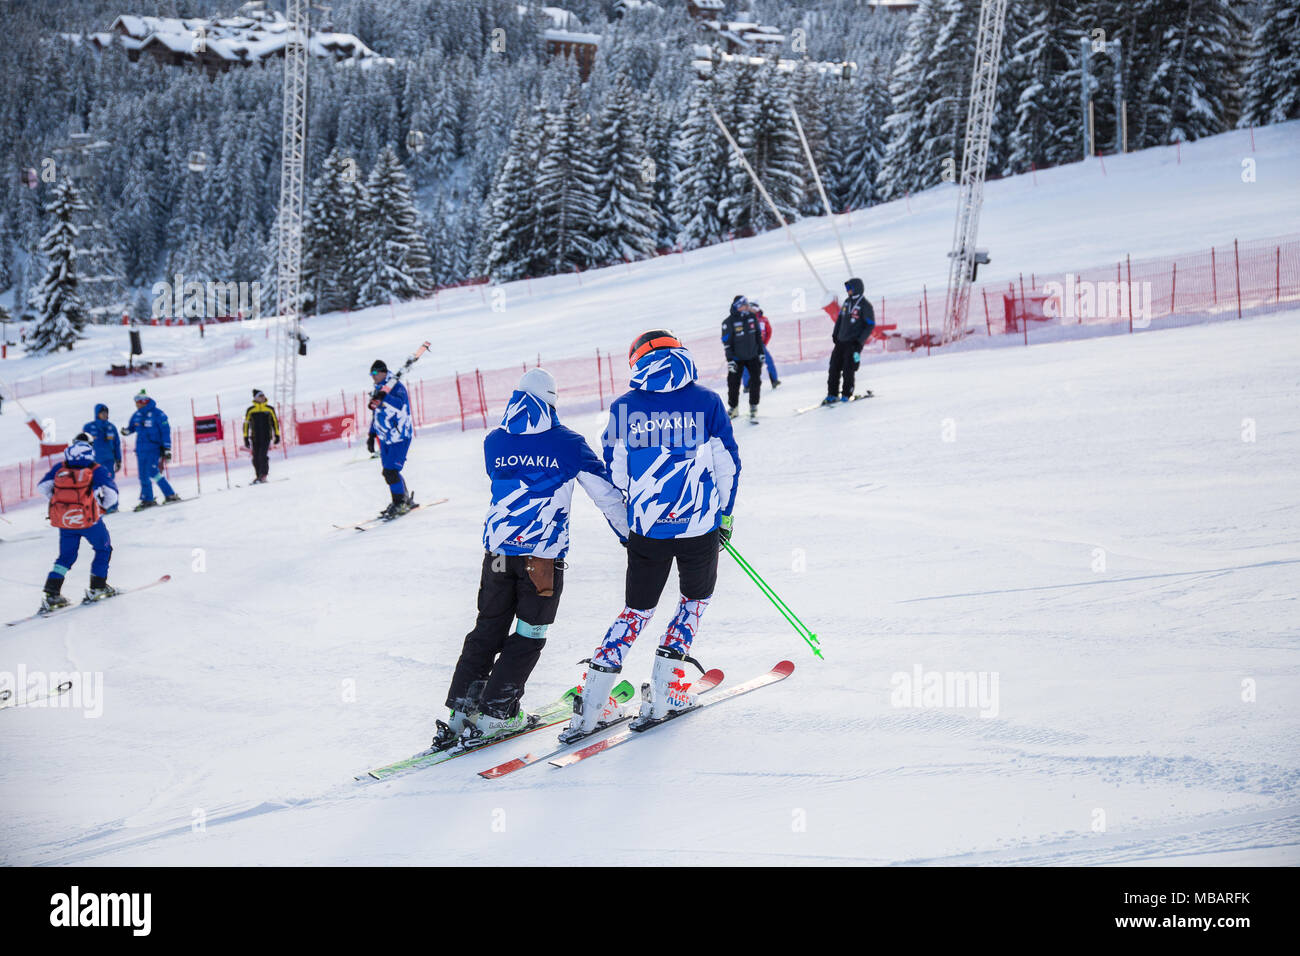 Petra Vlhova in Courchevel course inspection with her coach prior to the Giant Slalom Ski World Cup the 20th of December 2017 Stock Photo